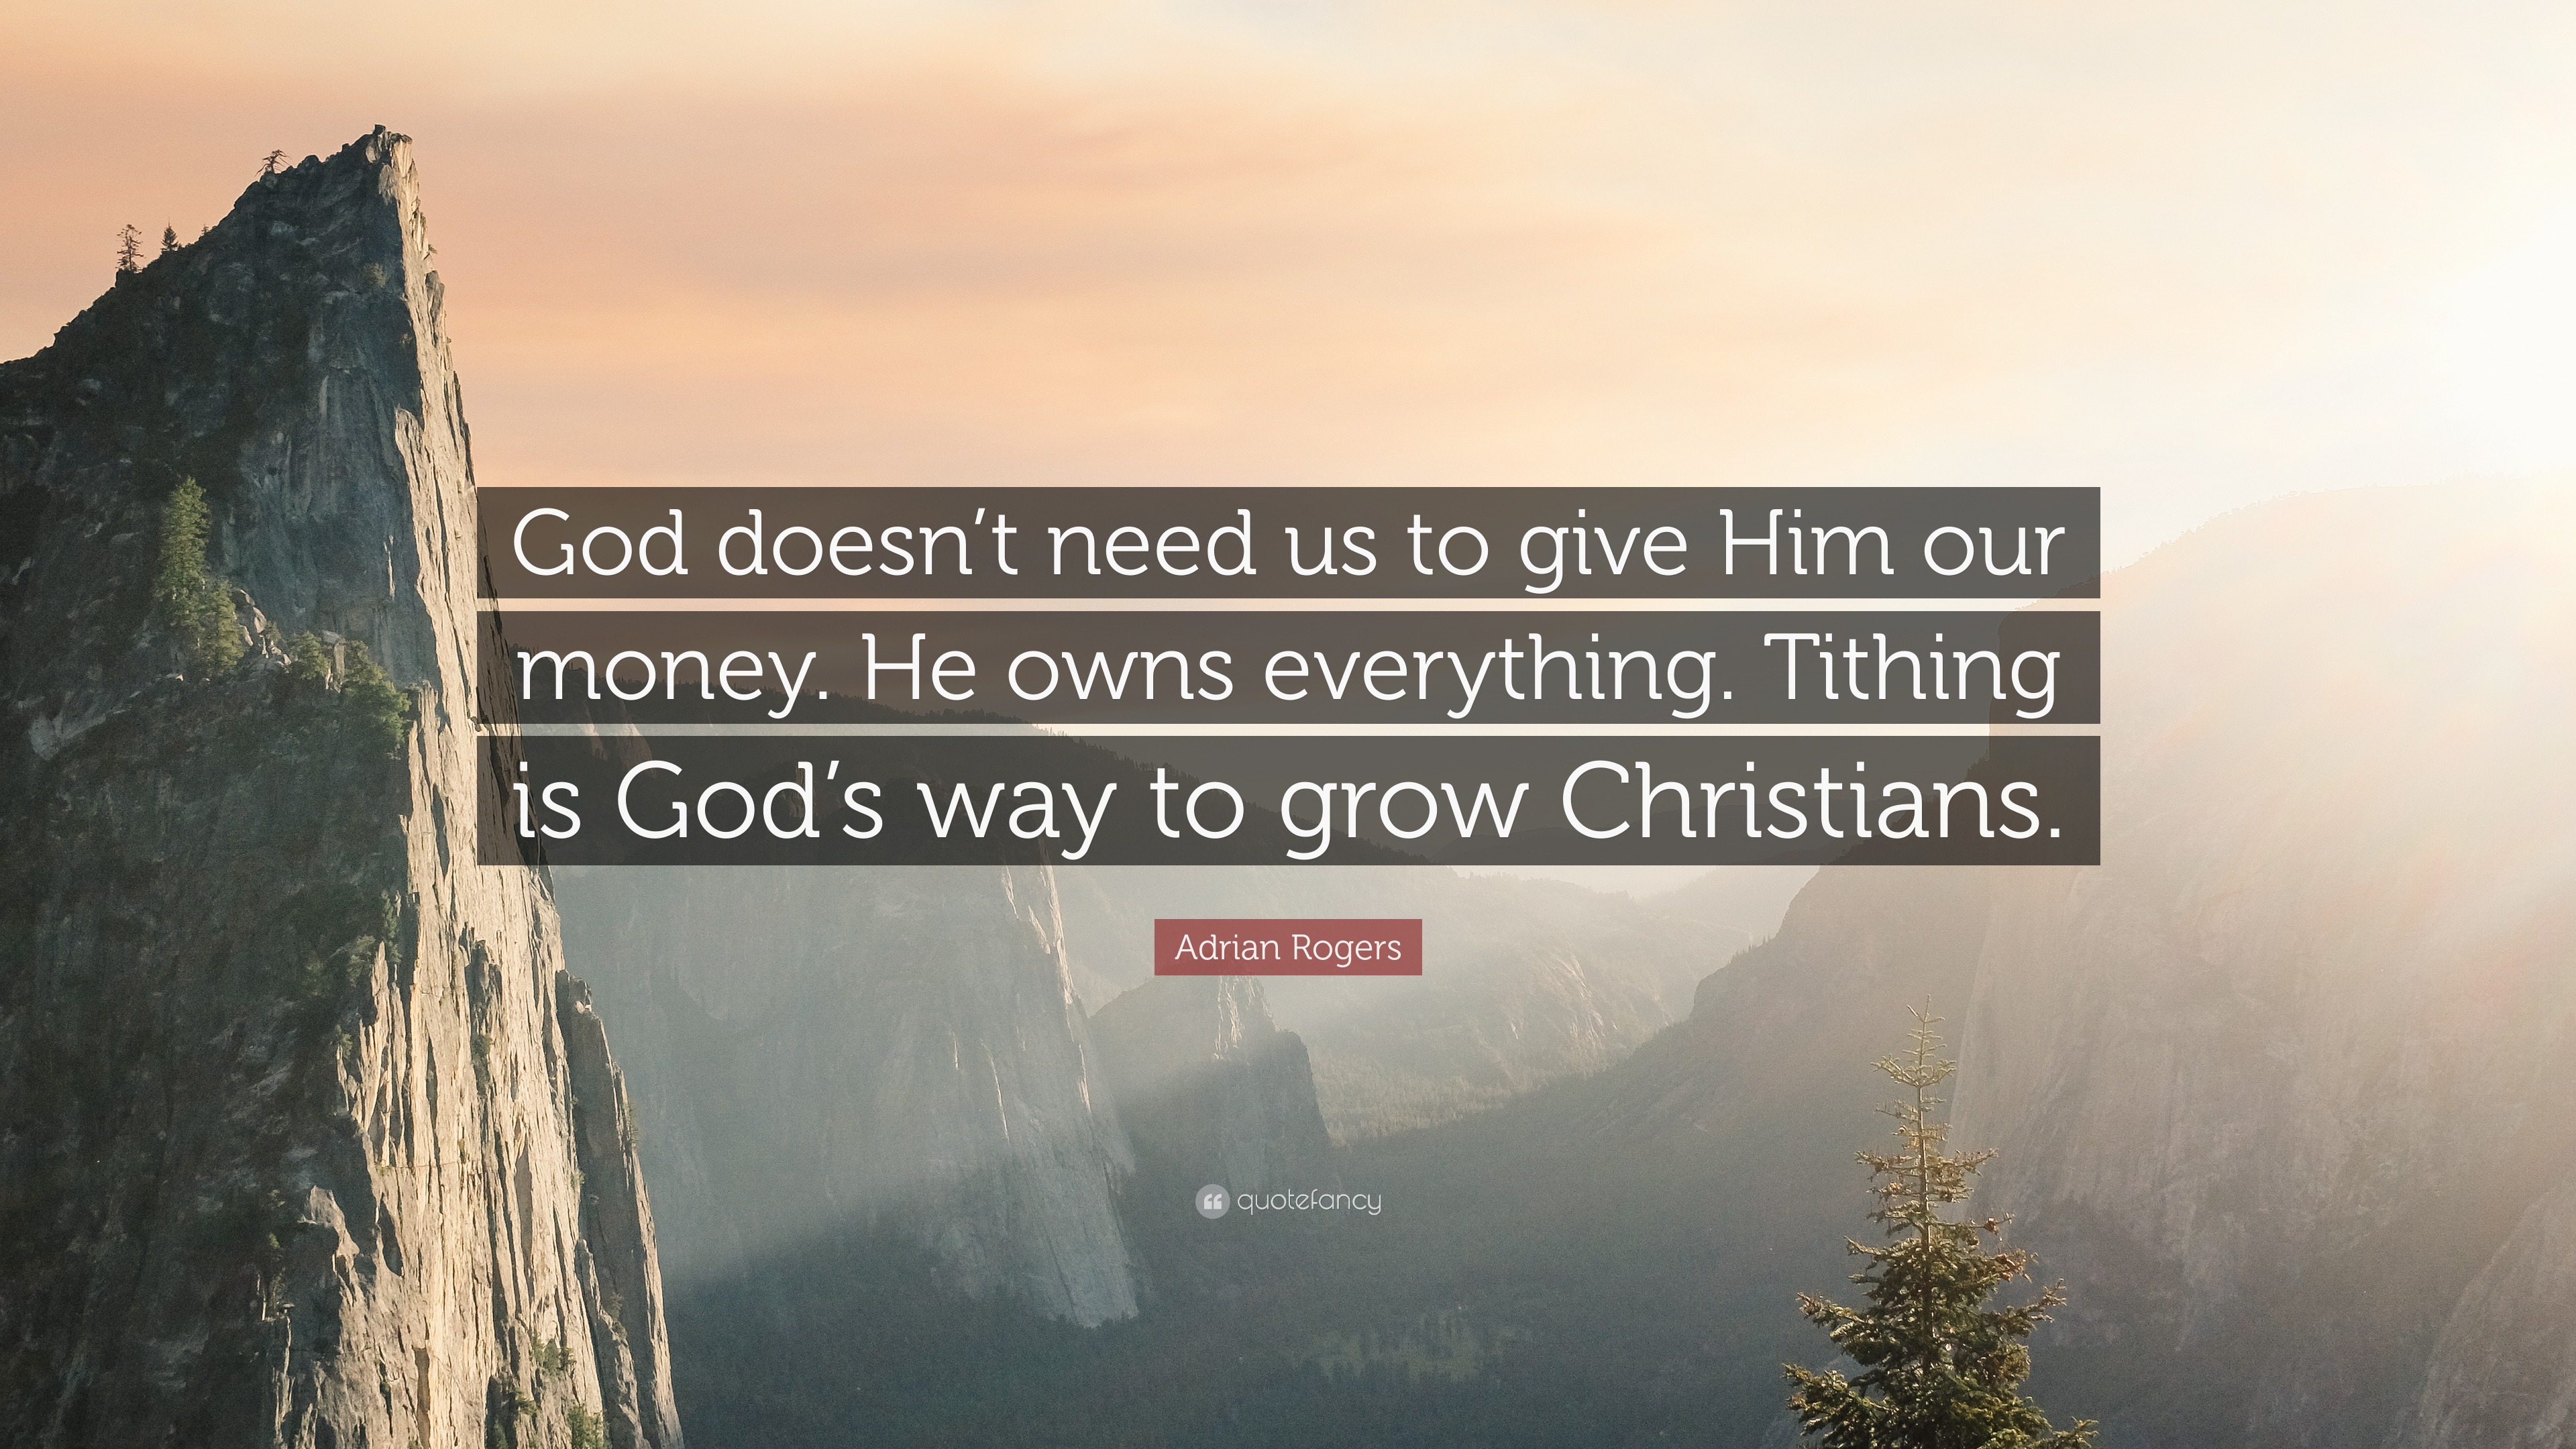 3854605 Adrian Rogers Quote God doesn t need us to give Him our money He